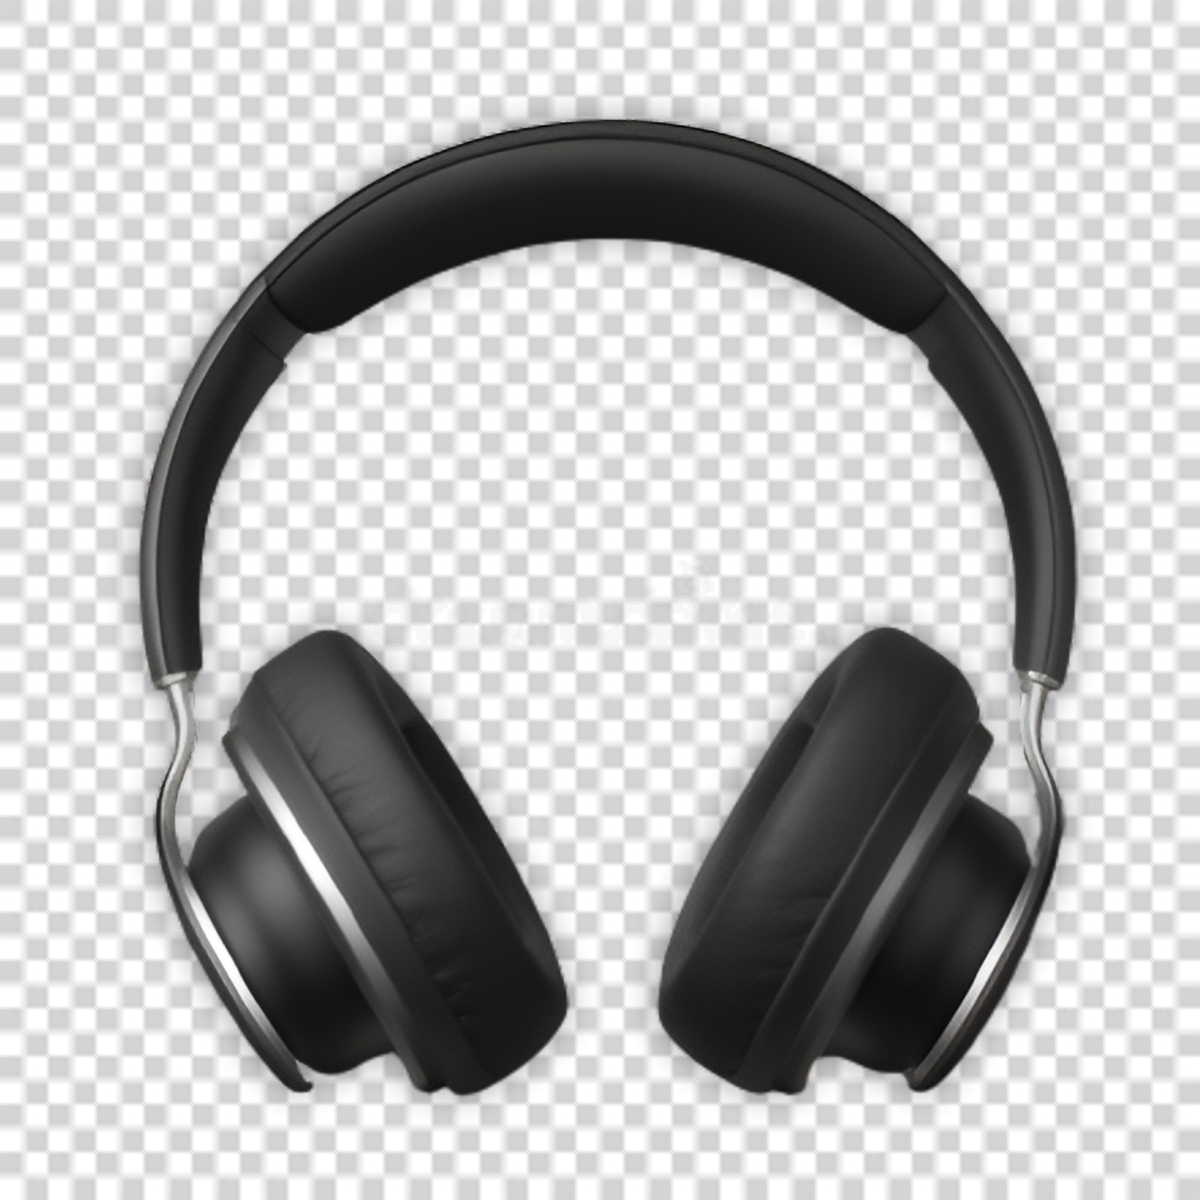 black headphone png image download for free